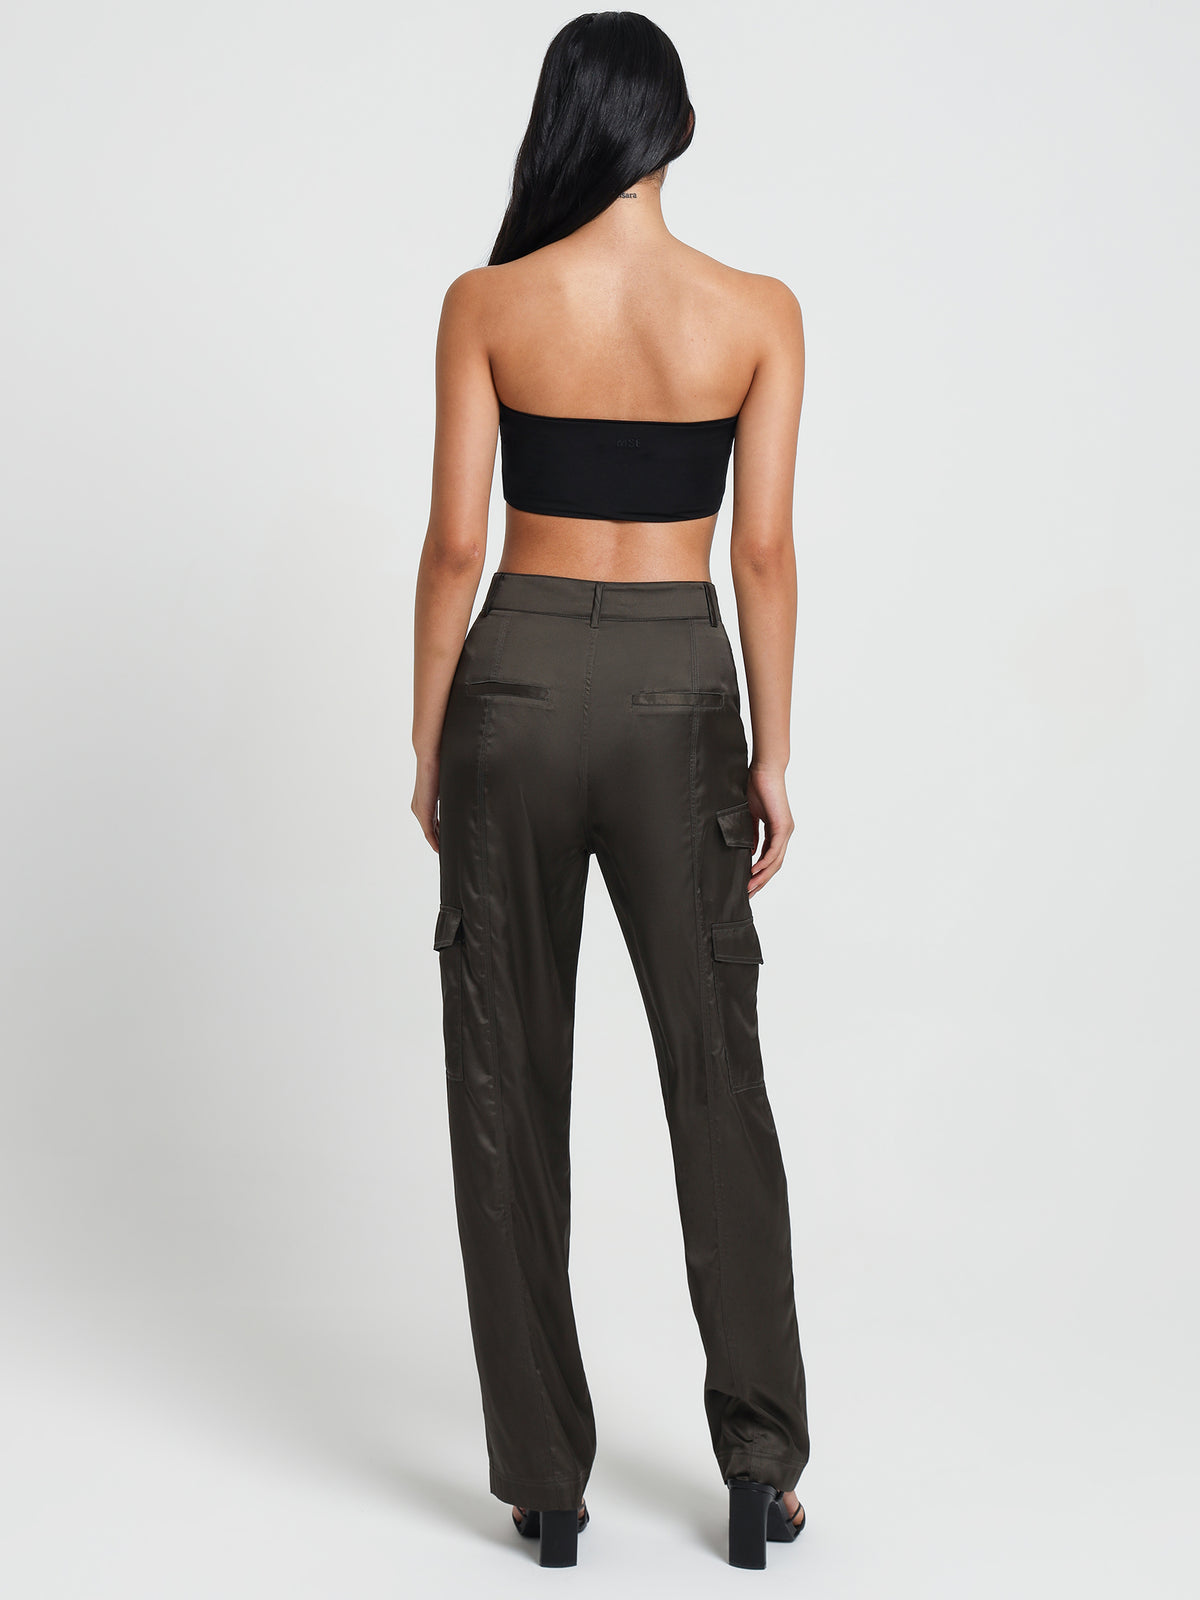 Suvi Satin Cargo Pants in Deep Olive